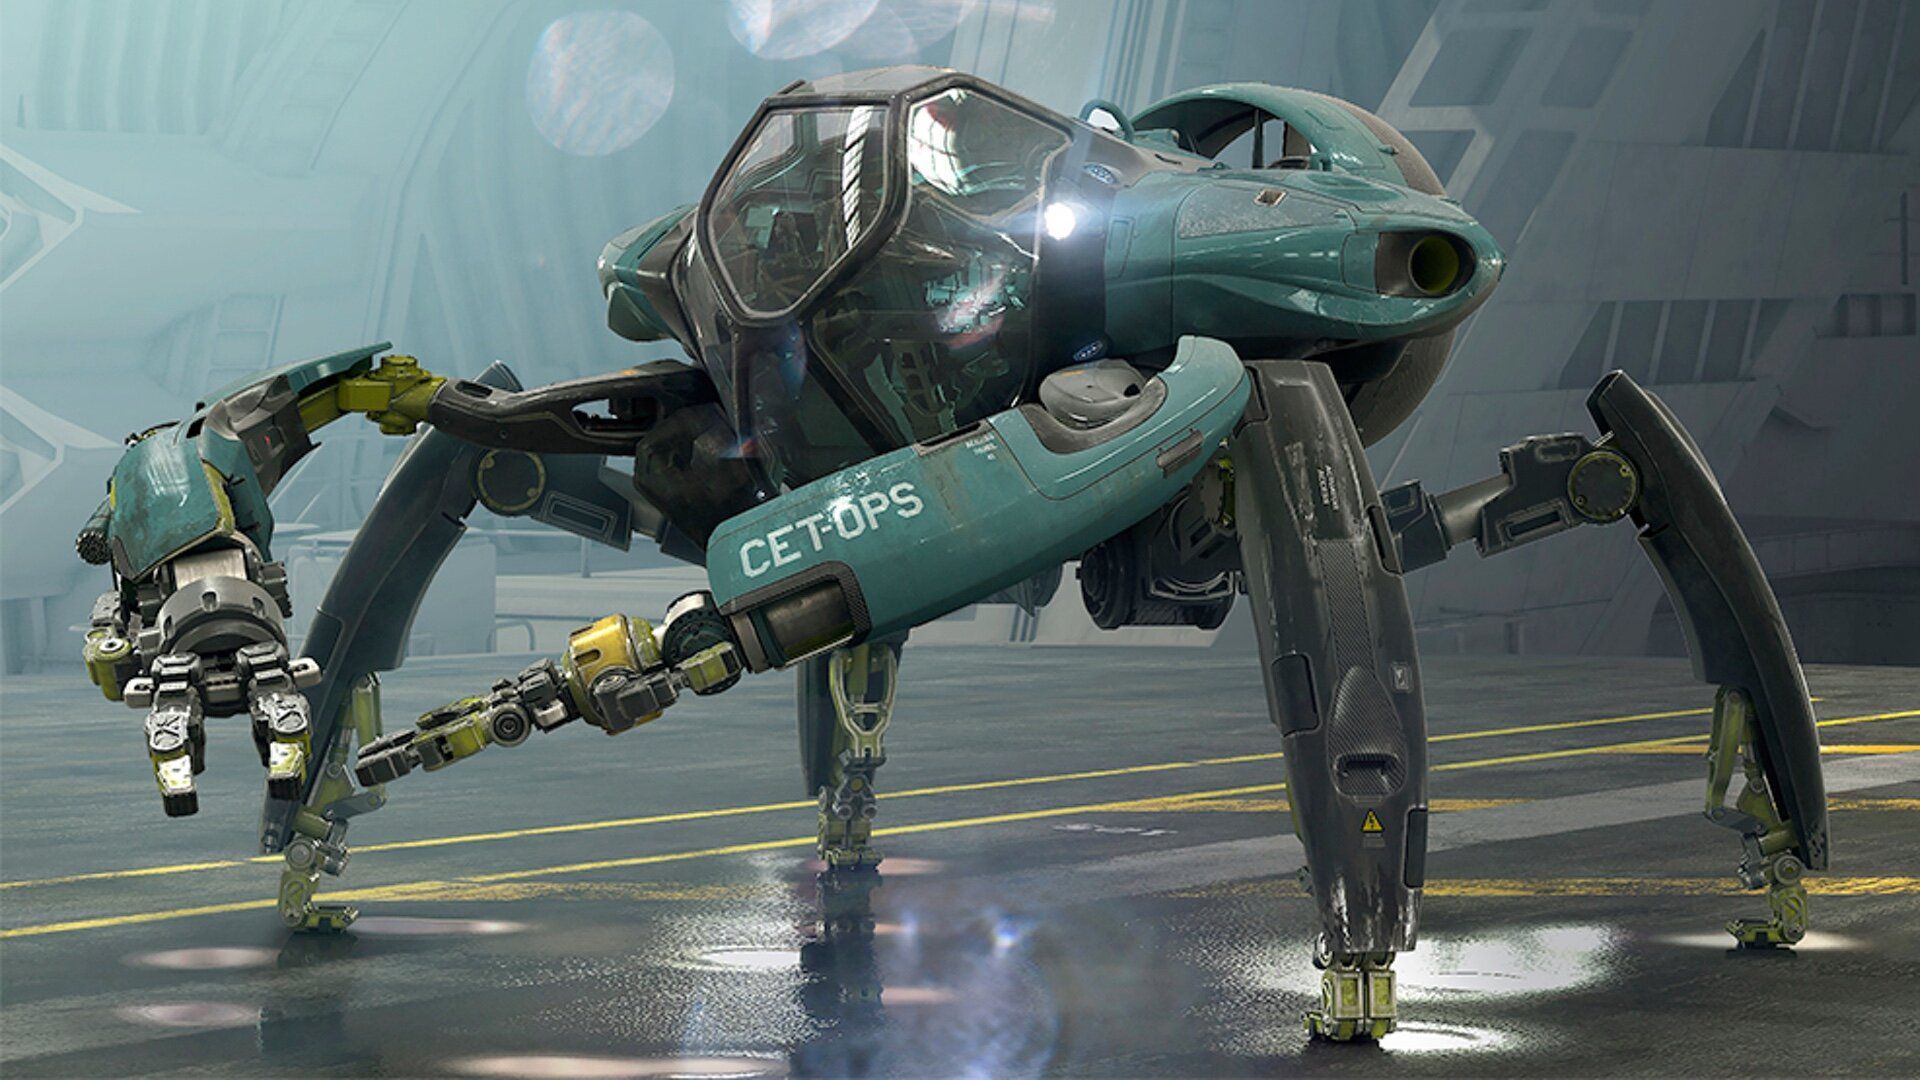 AVATAR 2 Concept Art Shows Off a Cool Underwater Vehicle Being Used in the Film